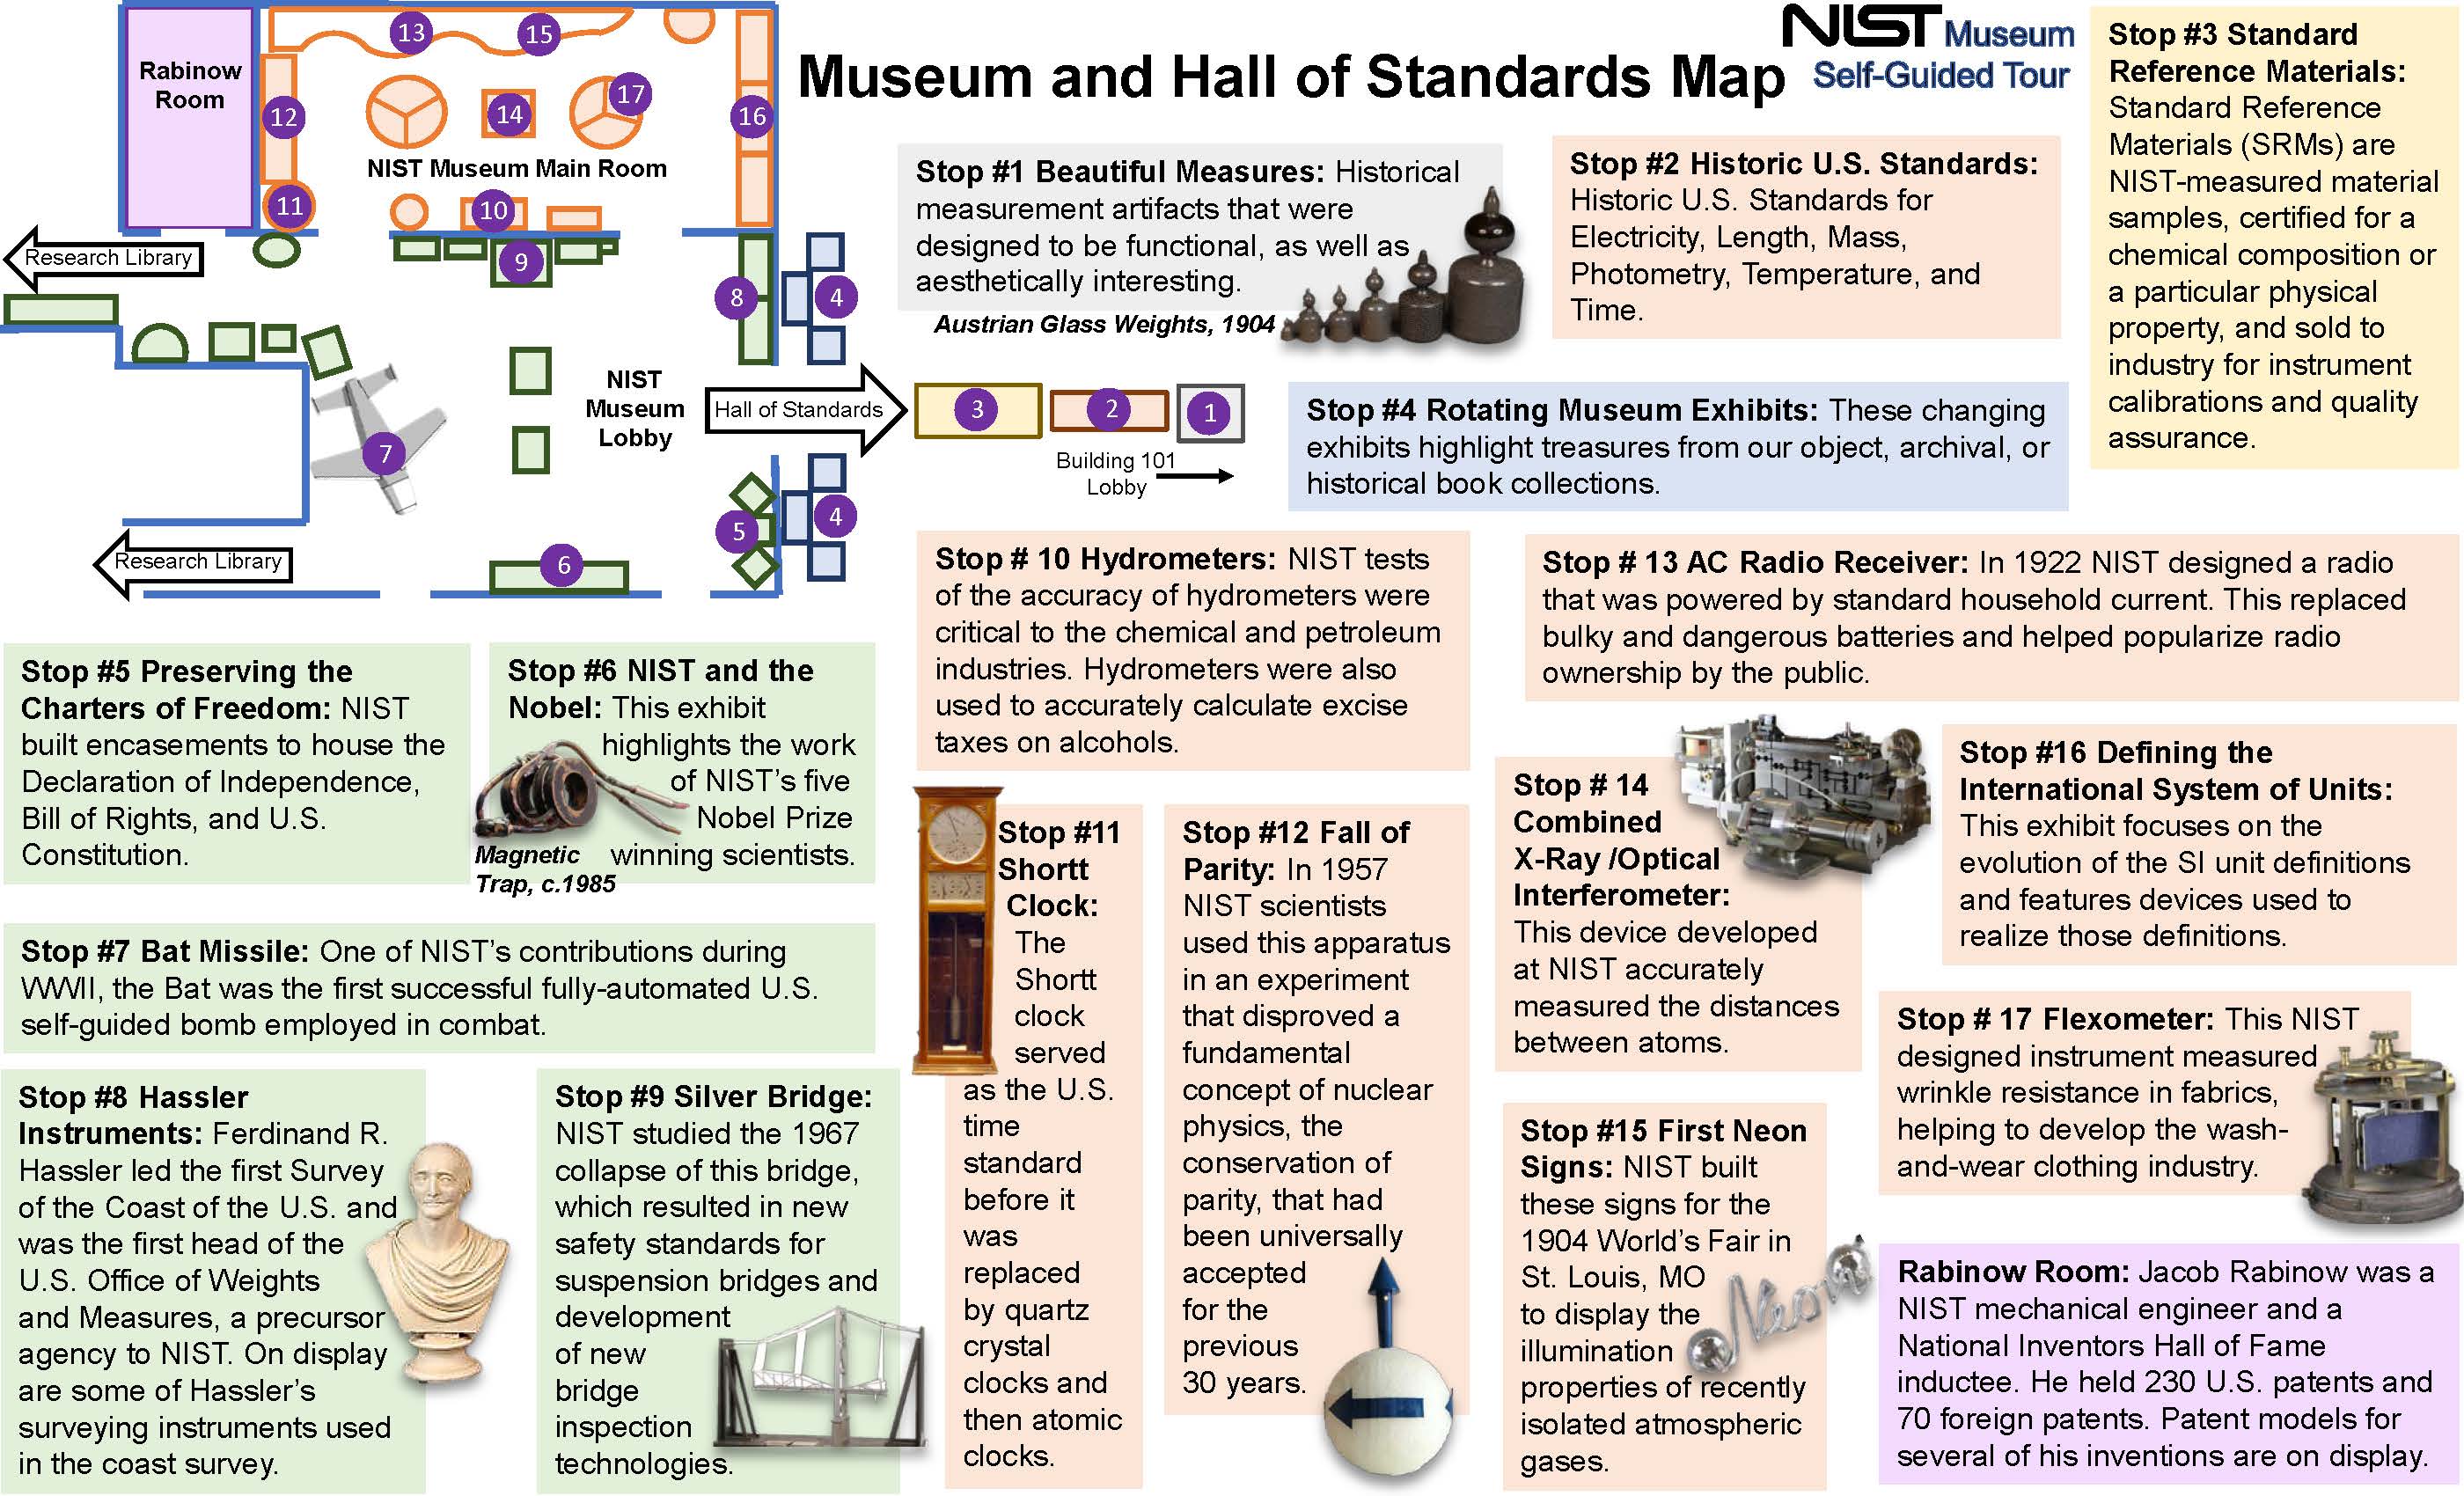 NIST Museum Self-Guides Tour Map with color coded Stop points for customers.